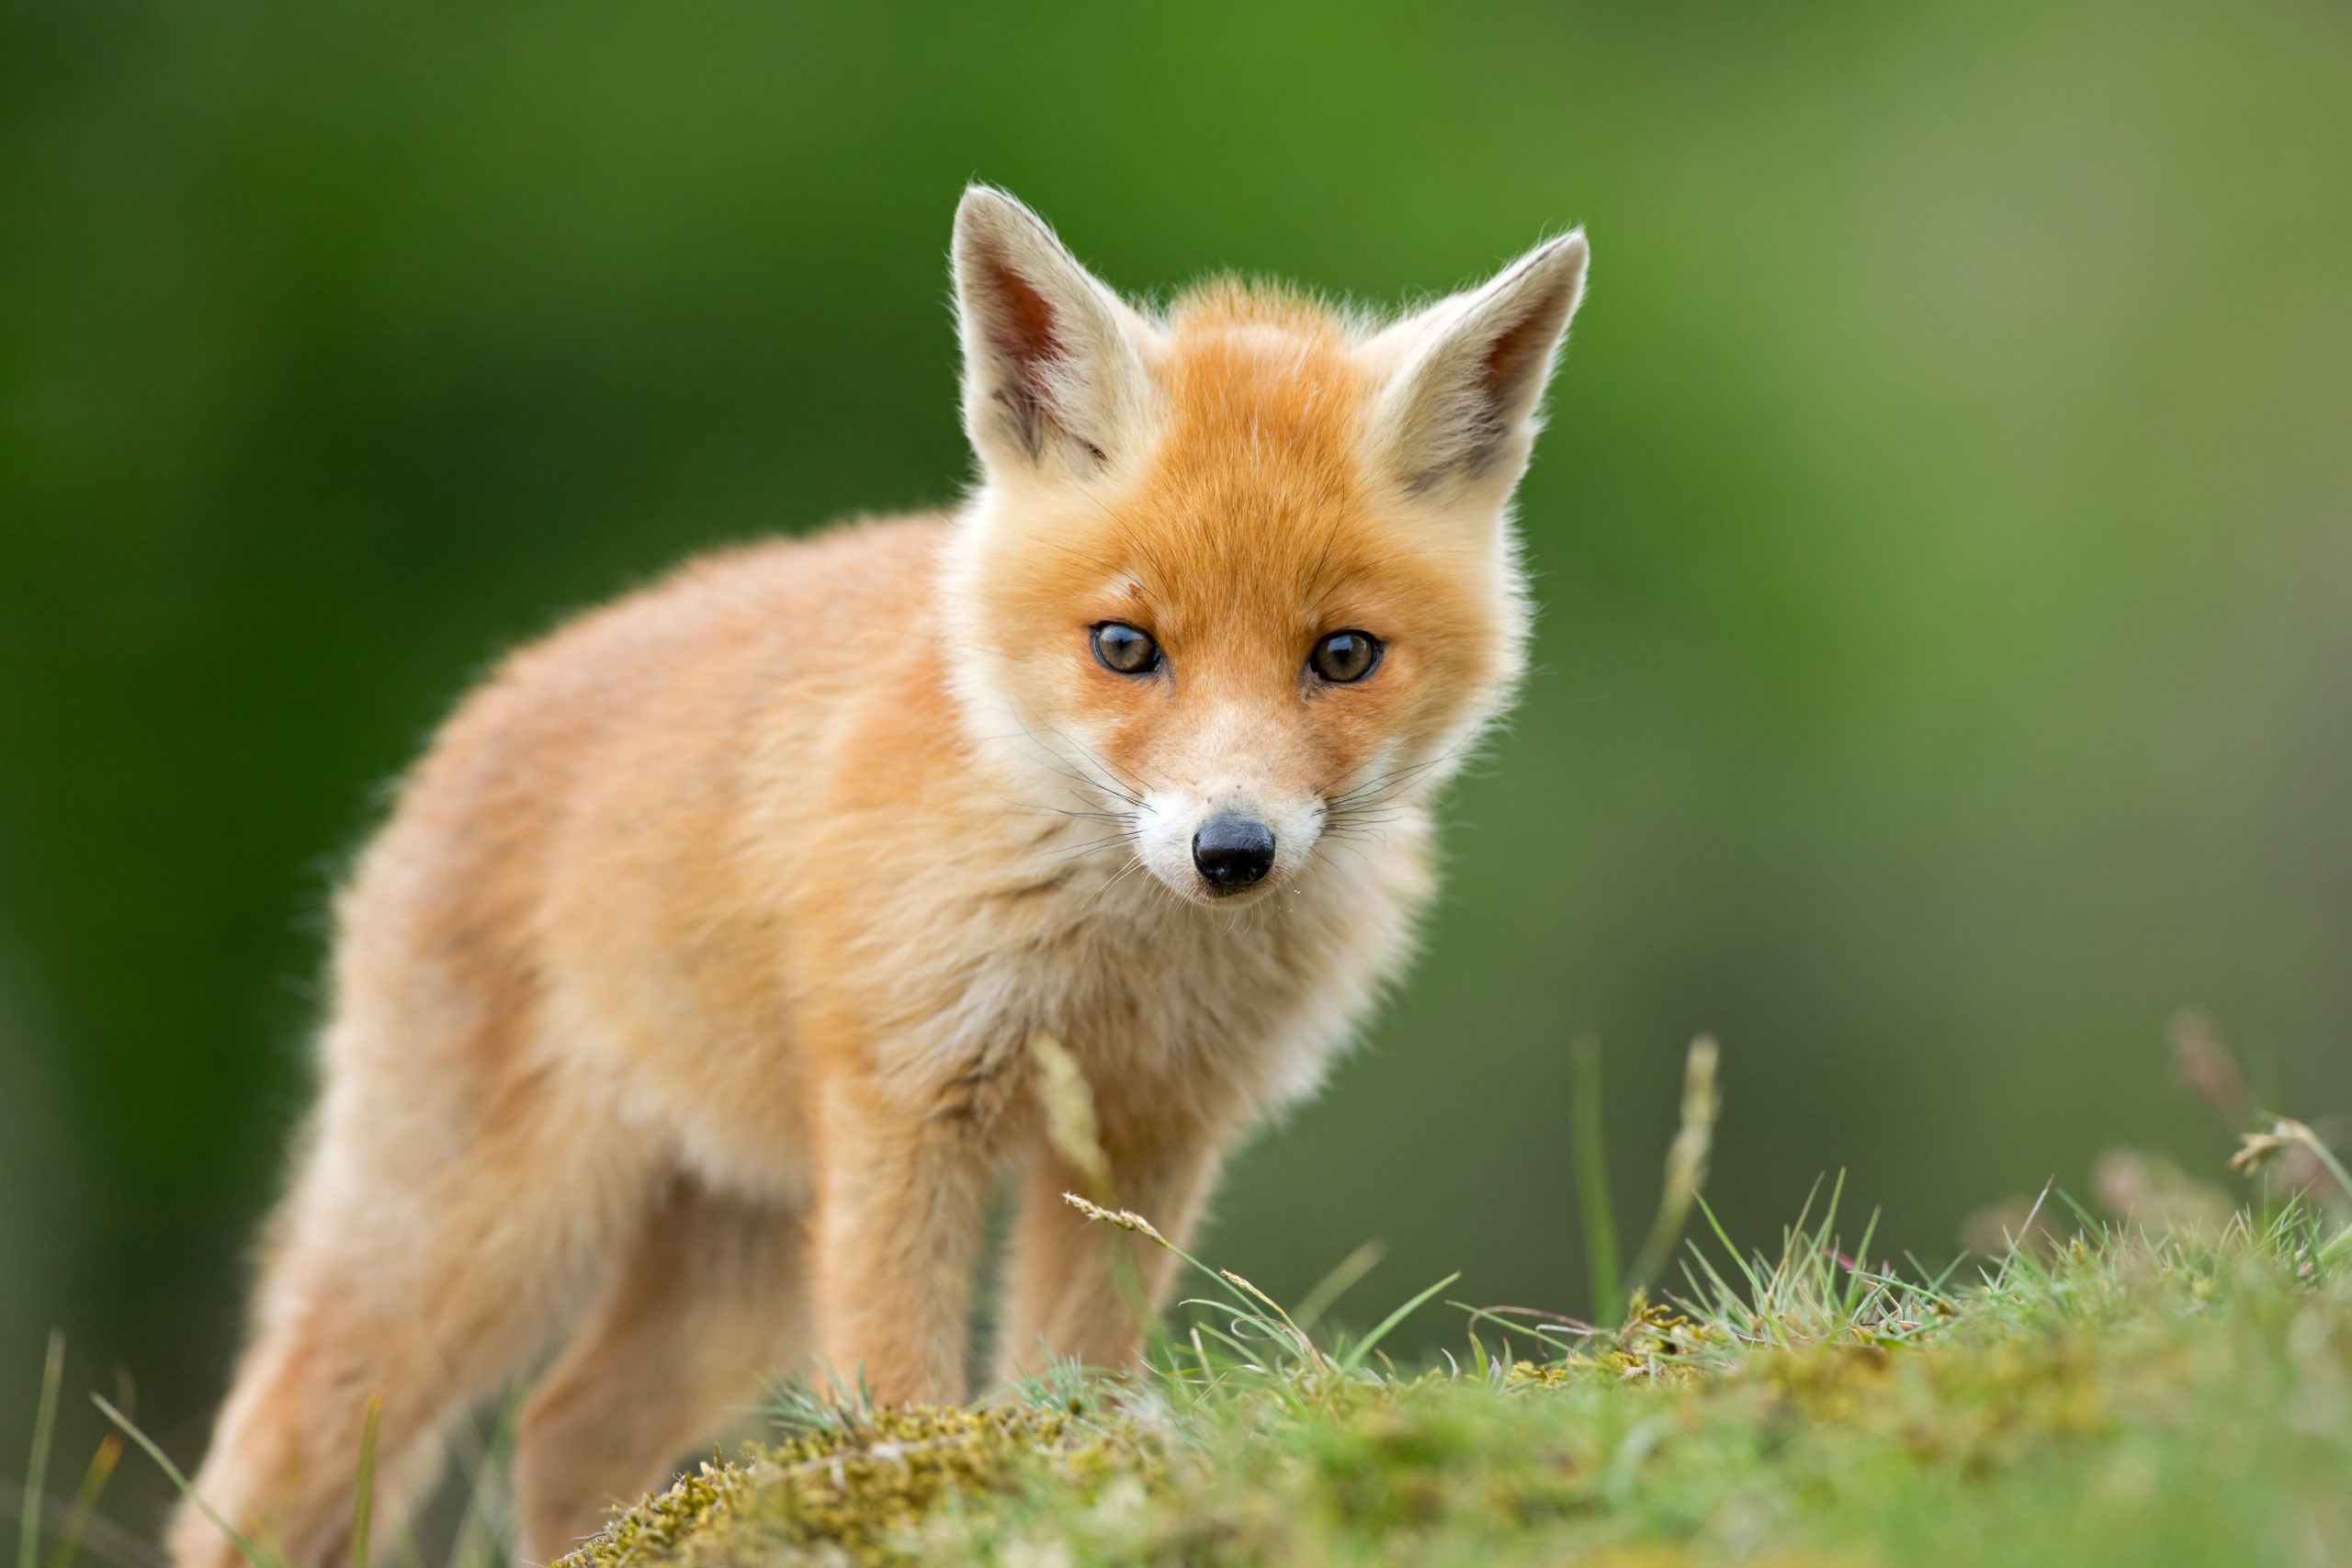 Several states introduce bills banning fur, voicing concerns over cruelty,  pandemic risk · A Humane World